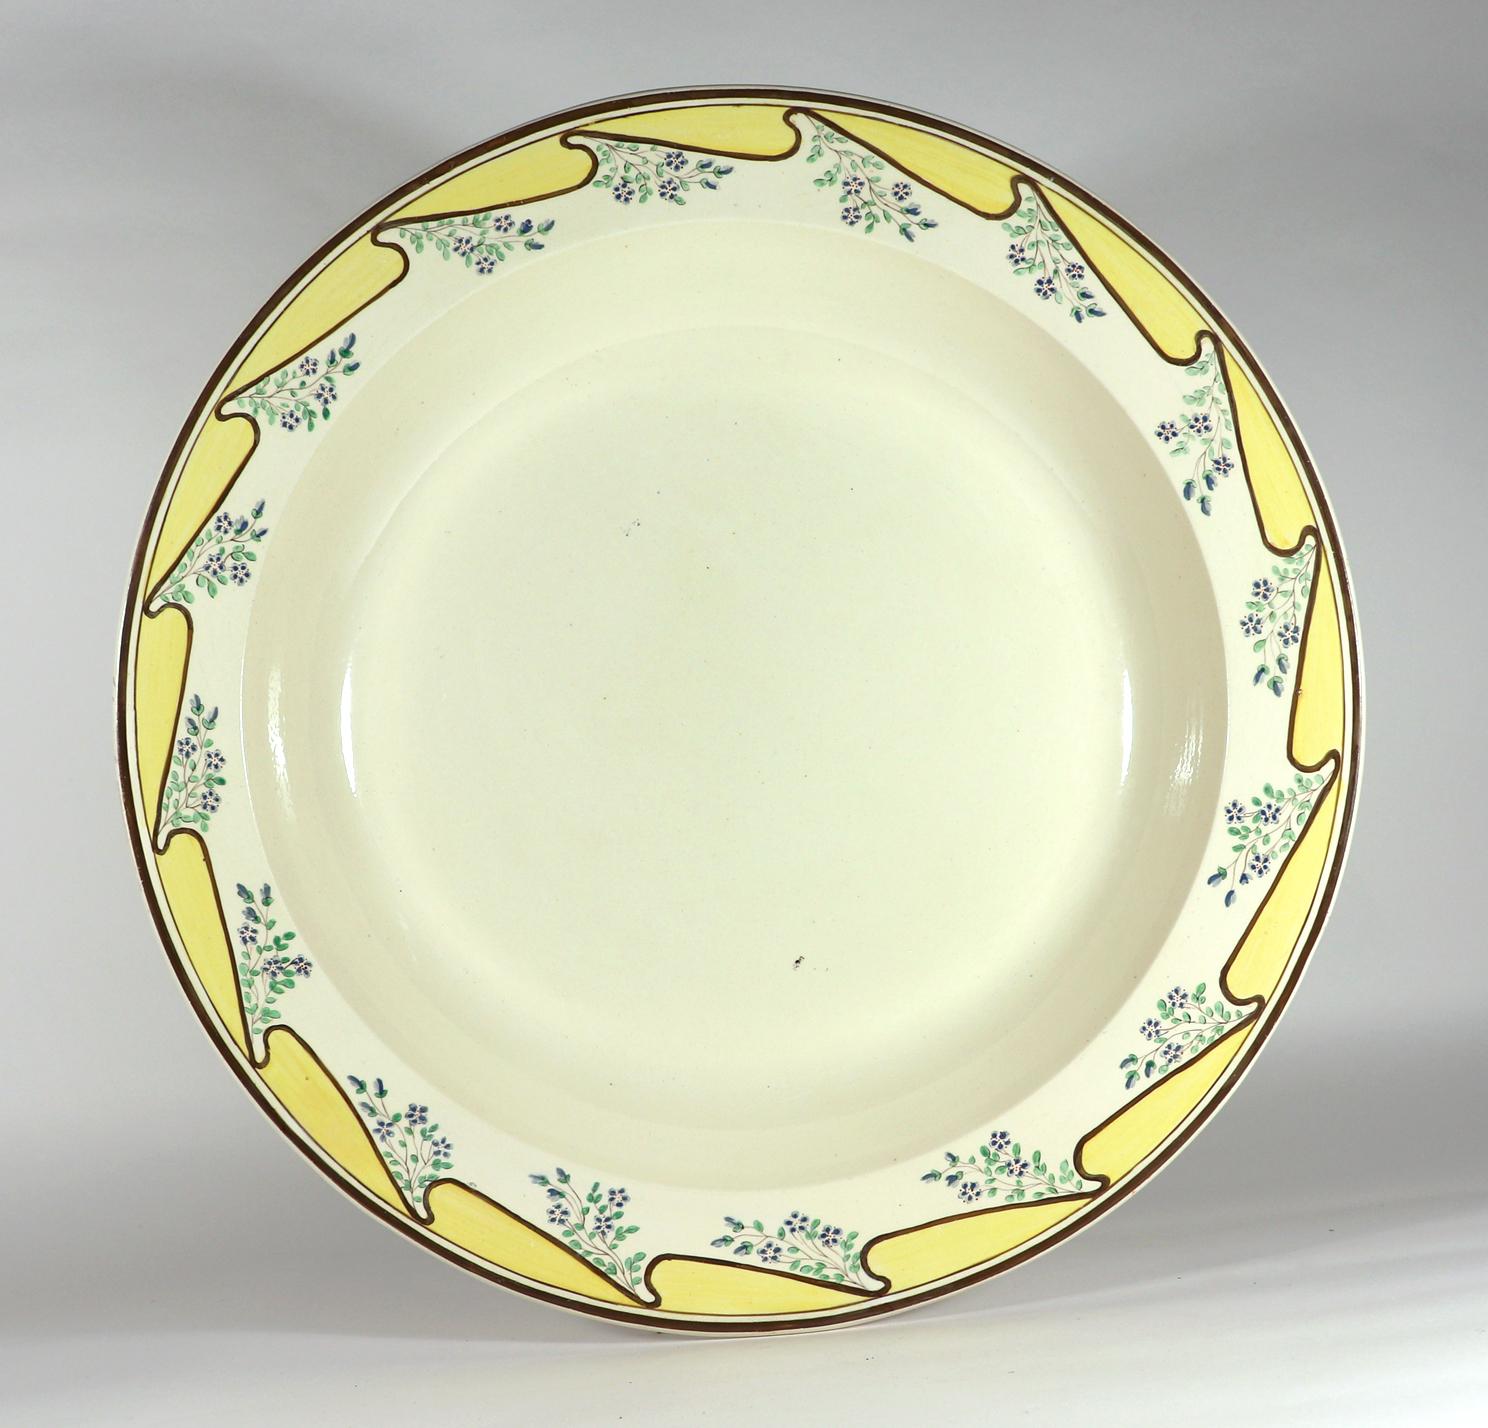 Massive English Creamware Pottery Yellow & Botanical Basin, 
John Shorthose, Shorthose & Heath,
1795-1815

The massive English creamware deep basin has a plain creamware center with the borders painted with a repeating wave of yellow with